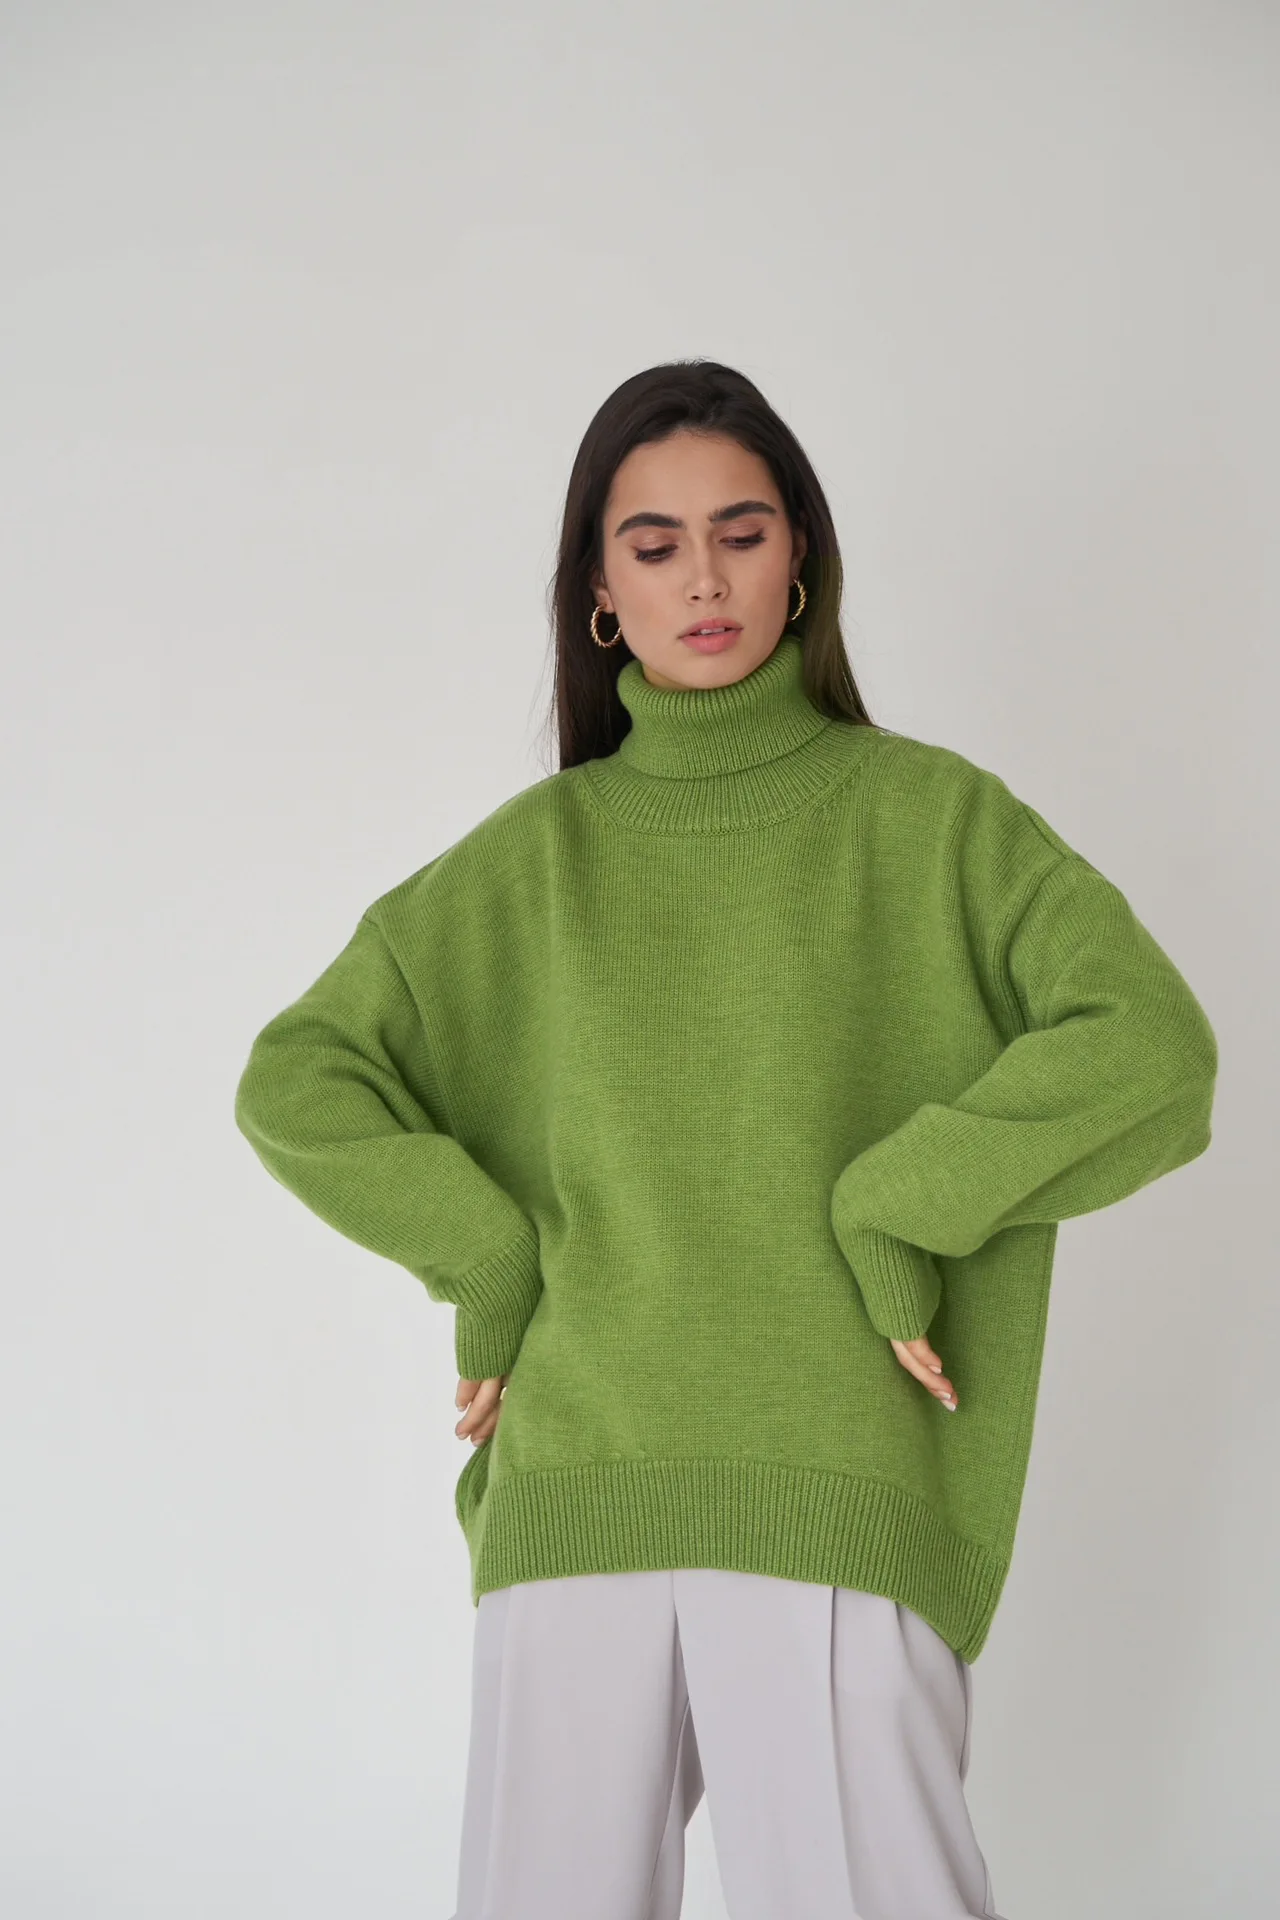 Women Turtleneck Sweater CHIC Autumn Winter Thick Warm Pullover Top Oversized Casual Loose Knitted Jumper Female Pull Clothes